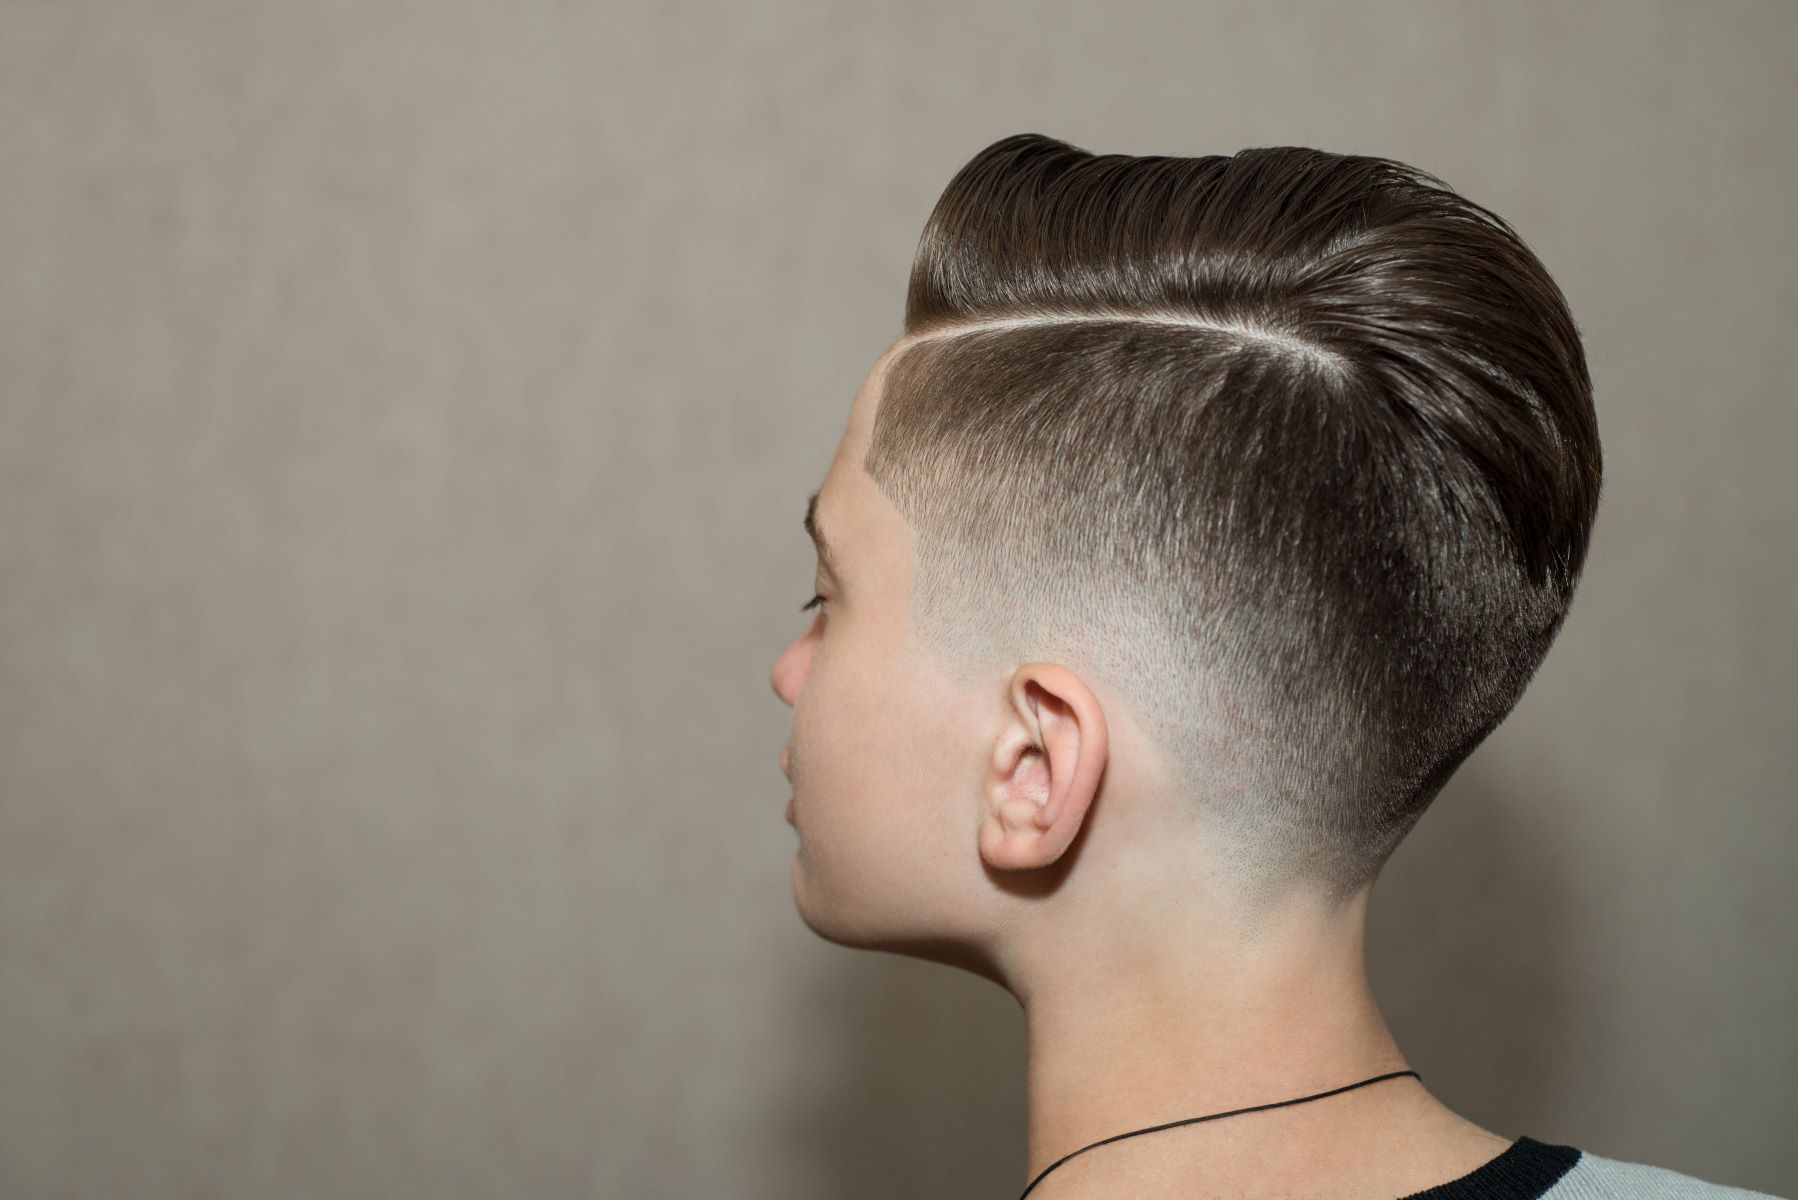 The Ultimate Haircut For Every Man: The Fade